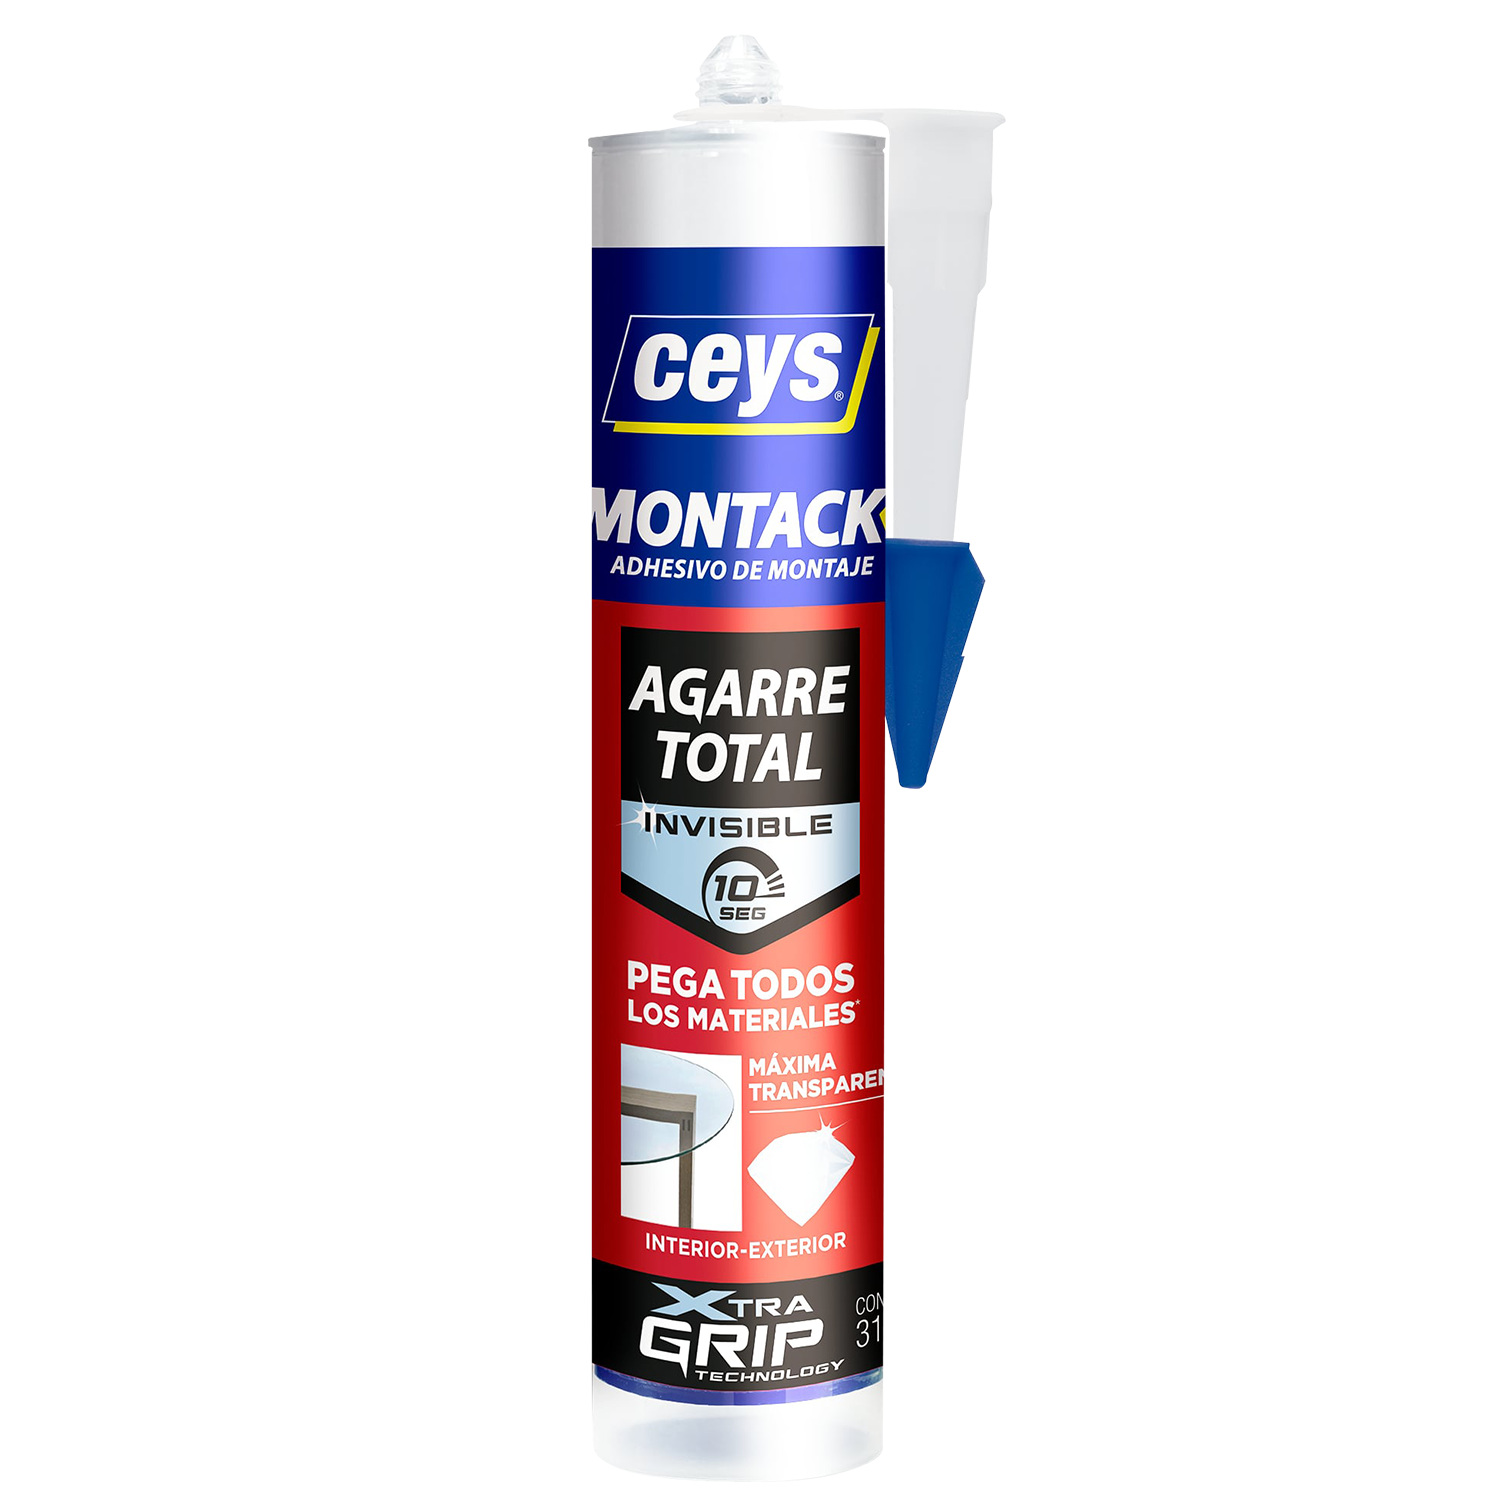 MONTACK AGARRE TOTAL INVISIBLE-Cartucho--315g